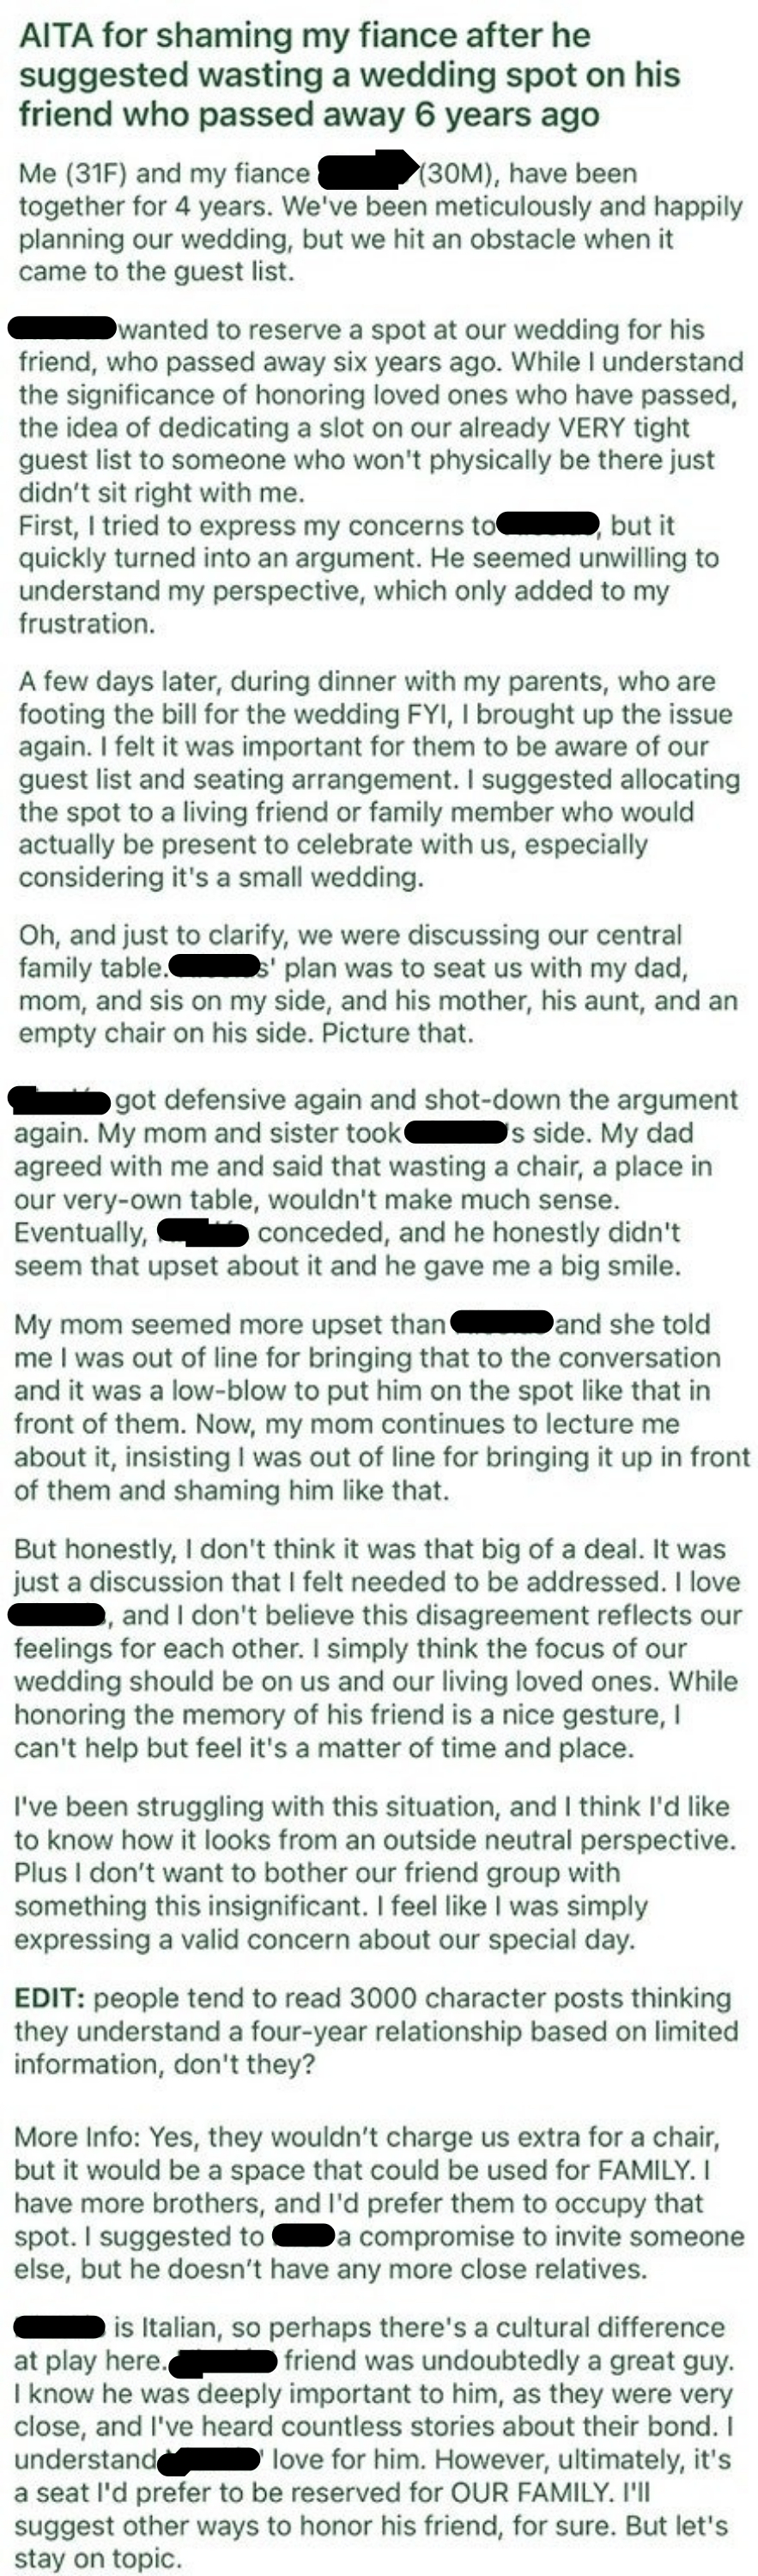 Text summary: A woman shares her frustration on Reddit about her sister-in-law, who shamed her fiancé after he arranged a memorial spot for his late friend at their wedding